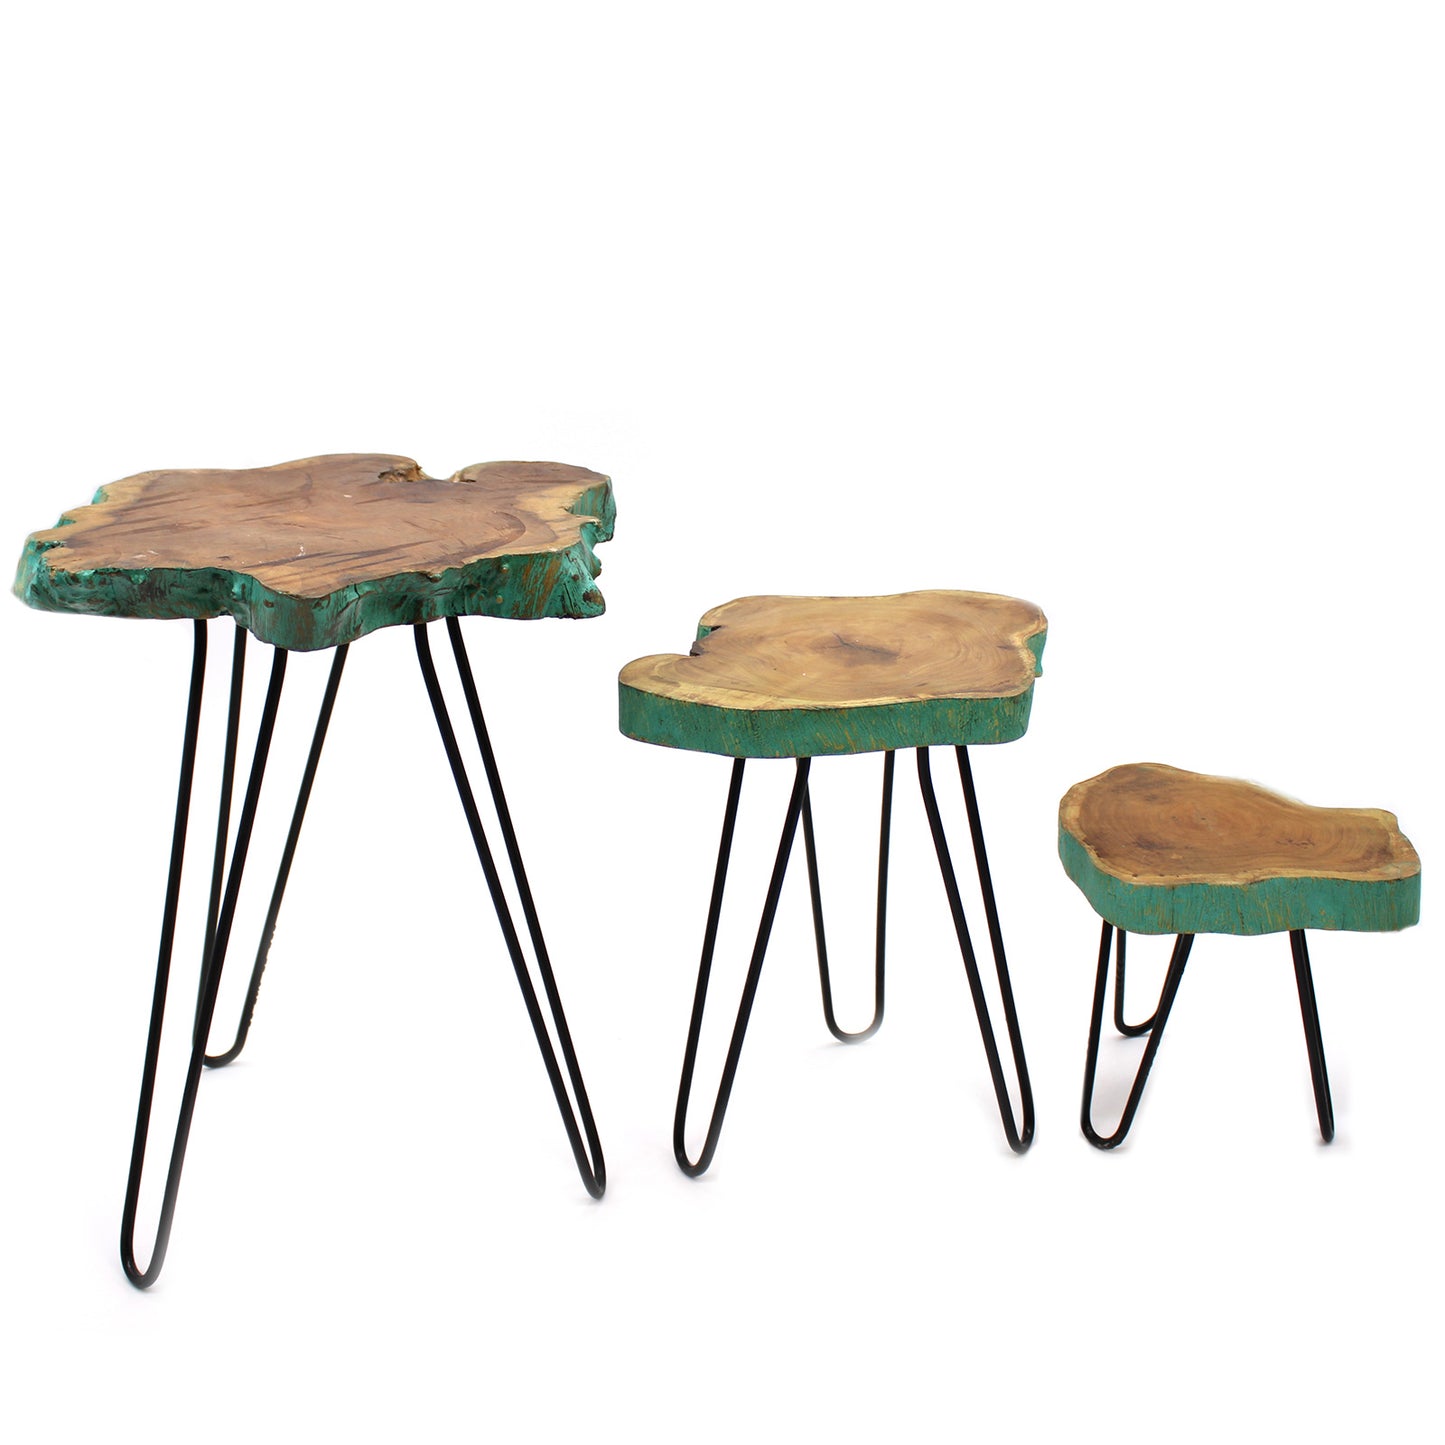 Set of 3 Gamal Wooden Plant Stands